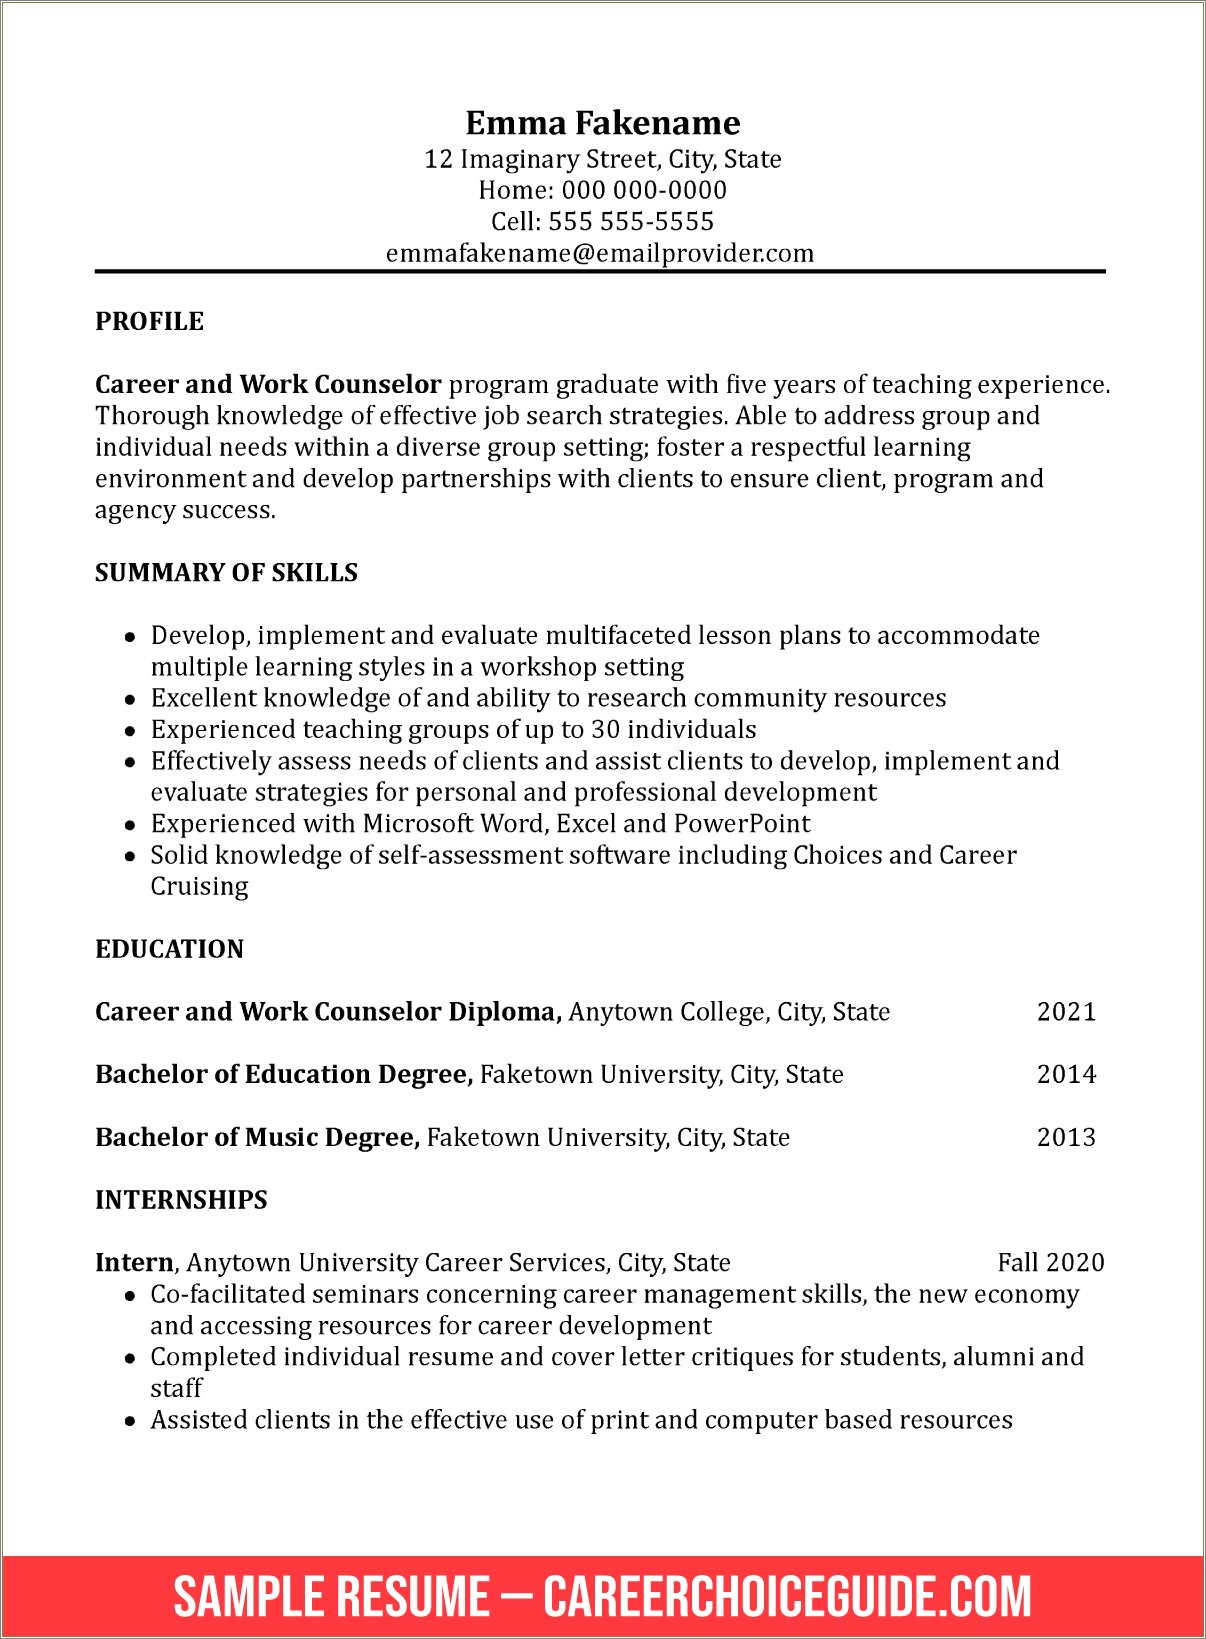 Example Of Resume Objective For Career Change